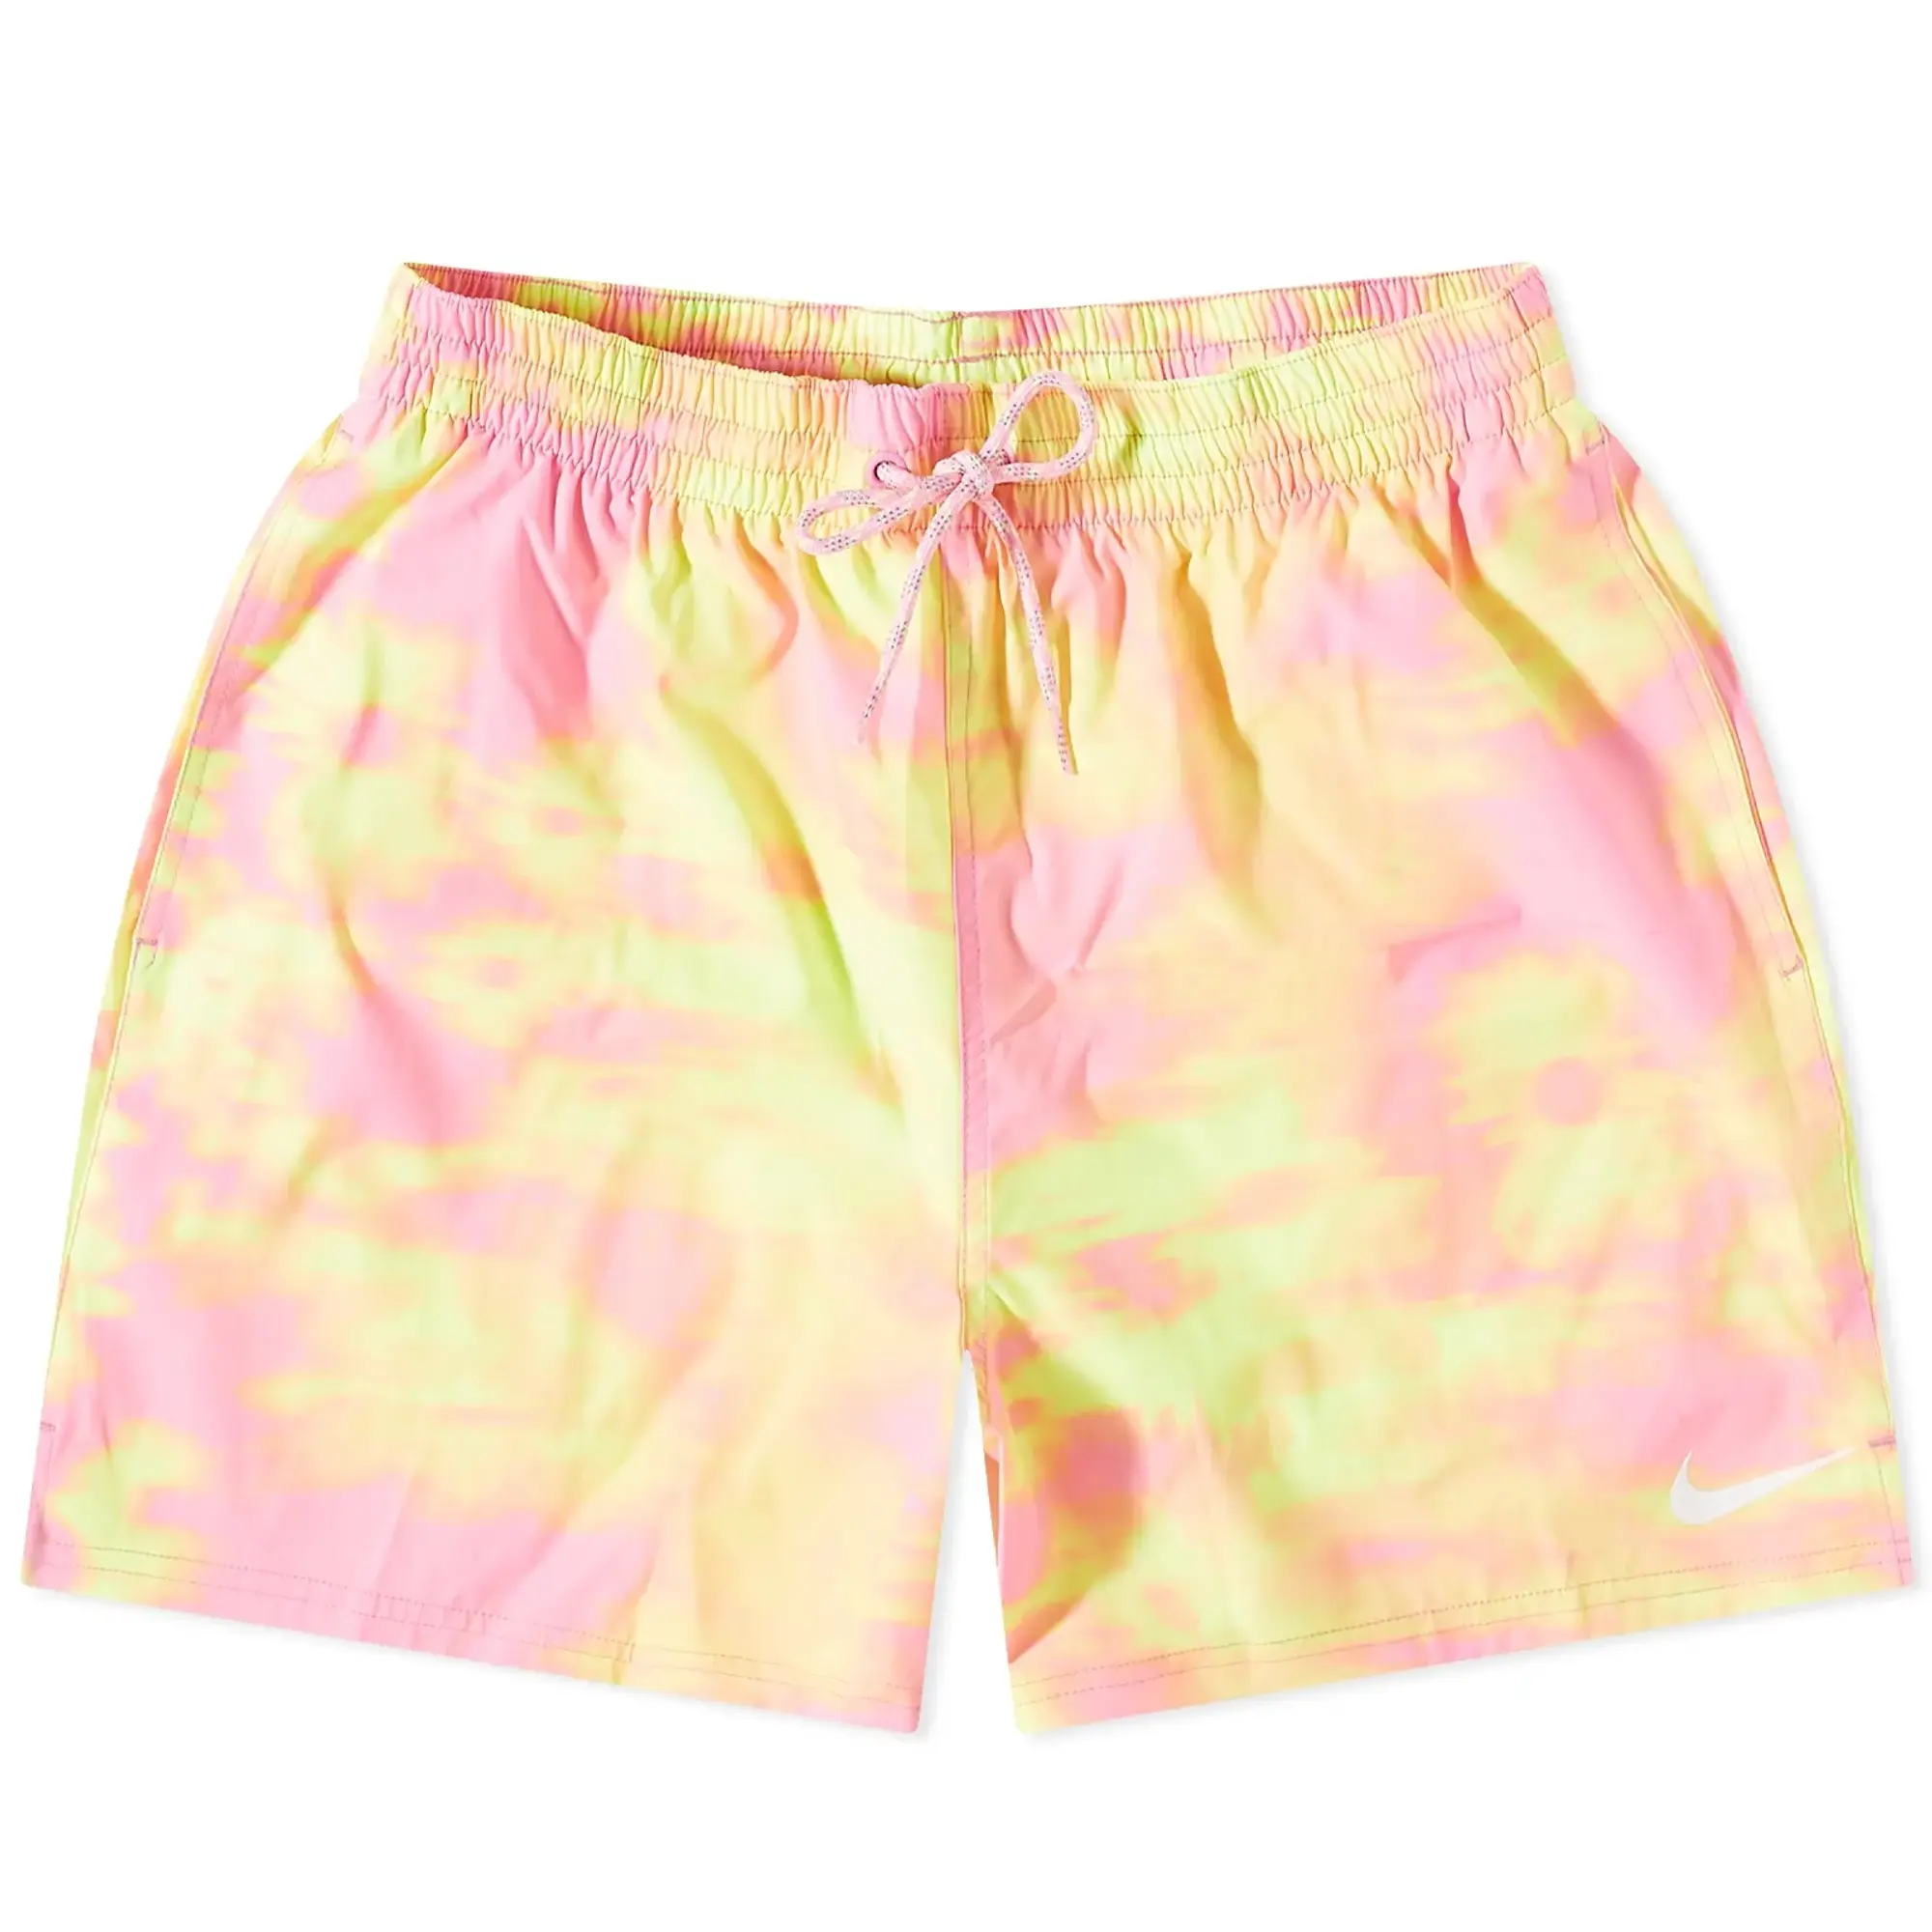 Nike 5 Inch Basic Volley Short - Pink Spell / Floral